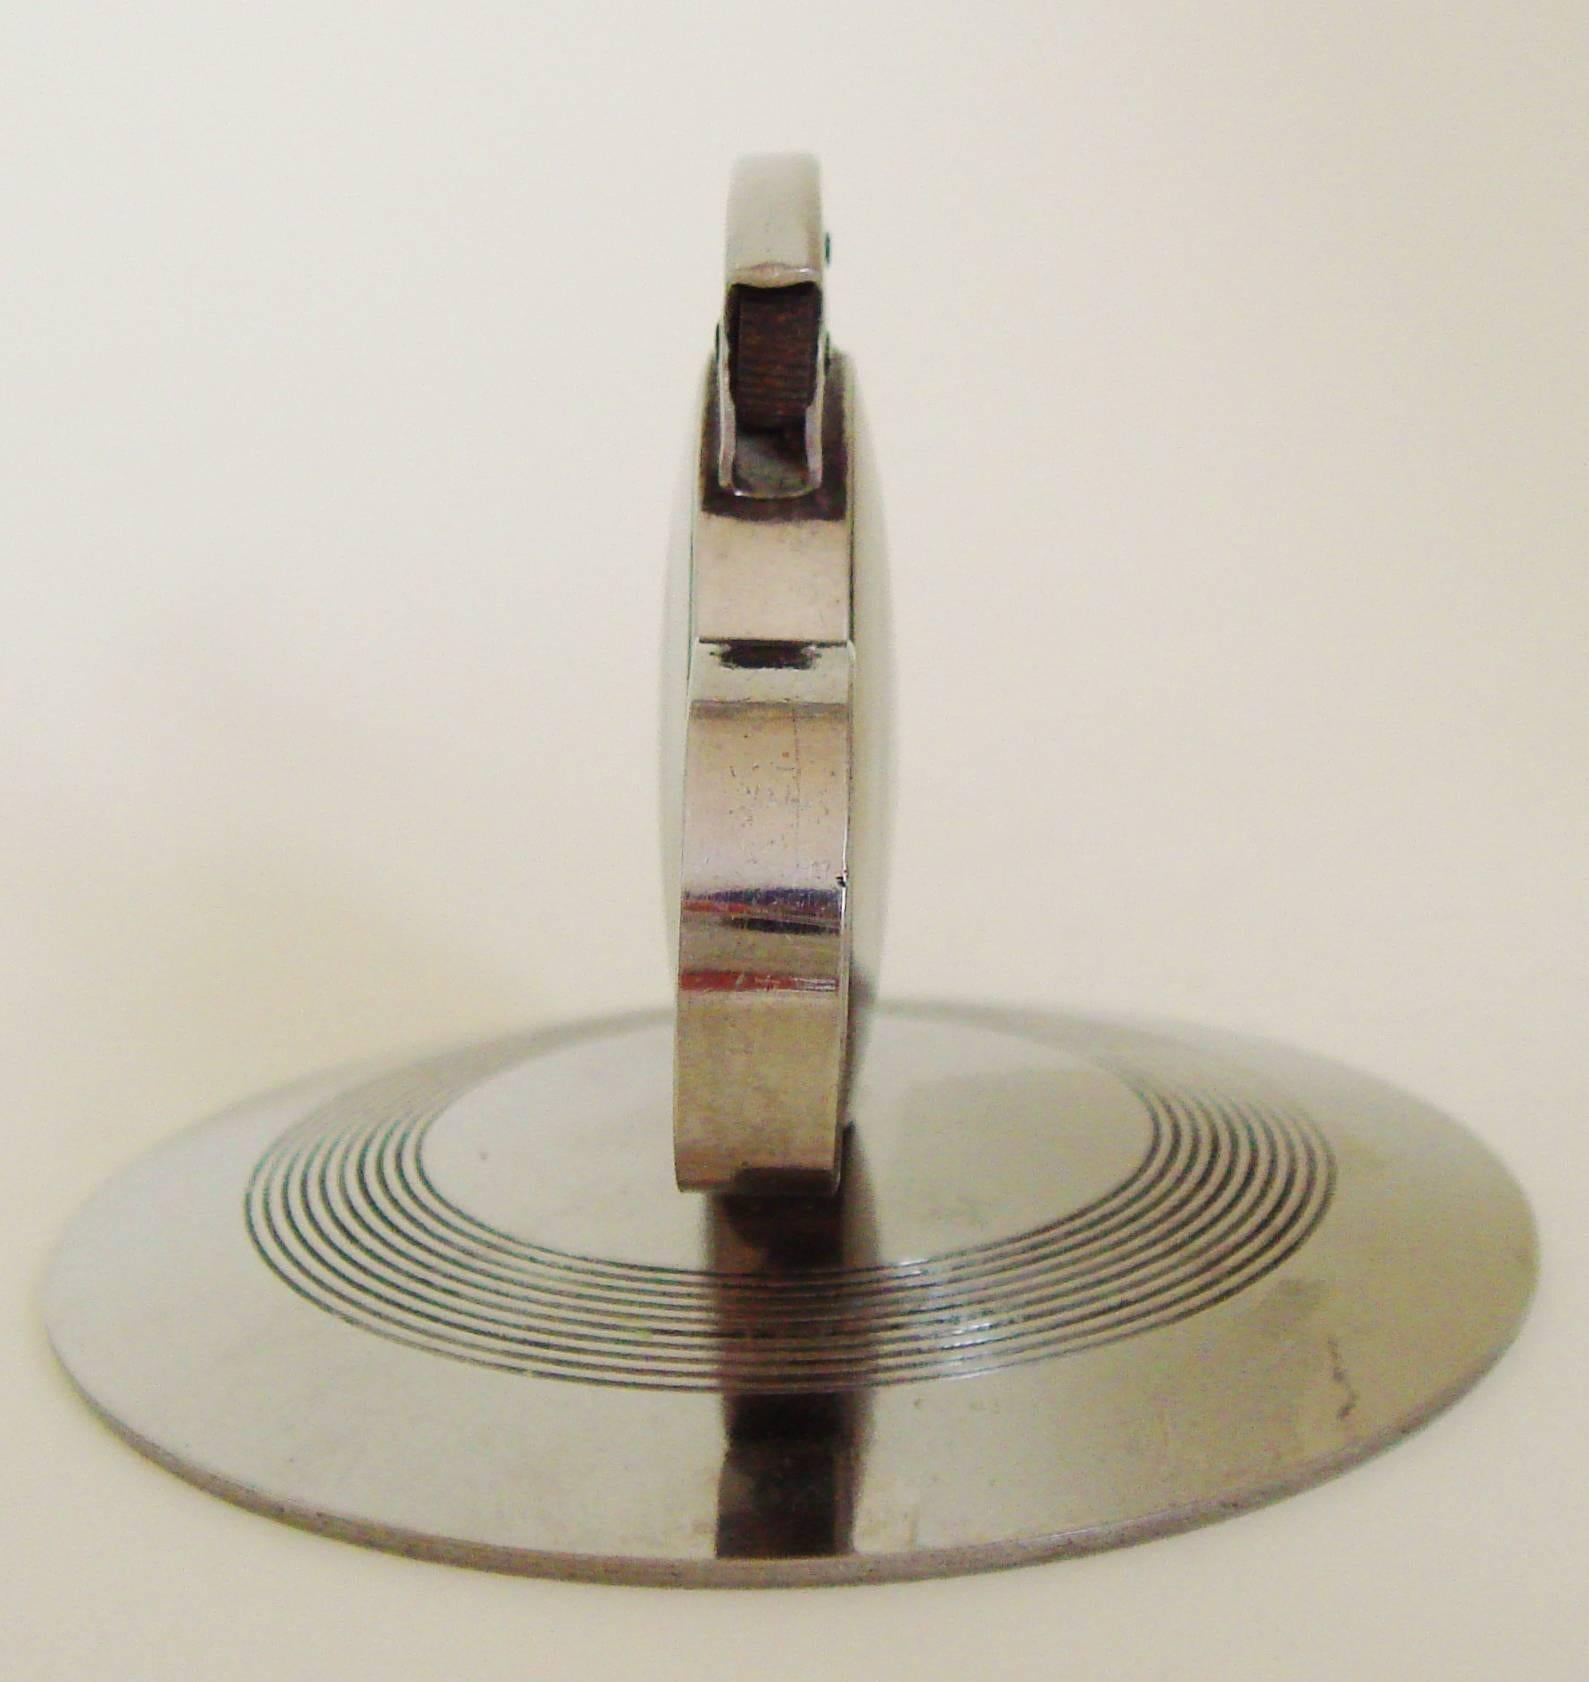 This very stylishly designed small Japanese Art Deco chrome mechanical wheel and flint table lighter is designed like a chamber-stick. It has a finger ring to pass the lighter round, a hinged cap to cover the wick and incised rings for decoration on